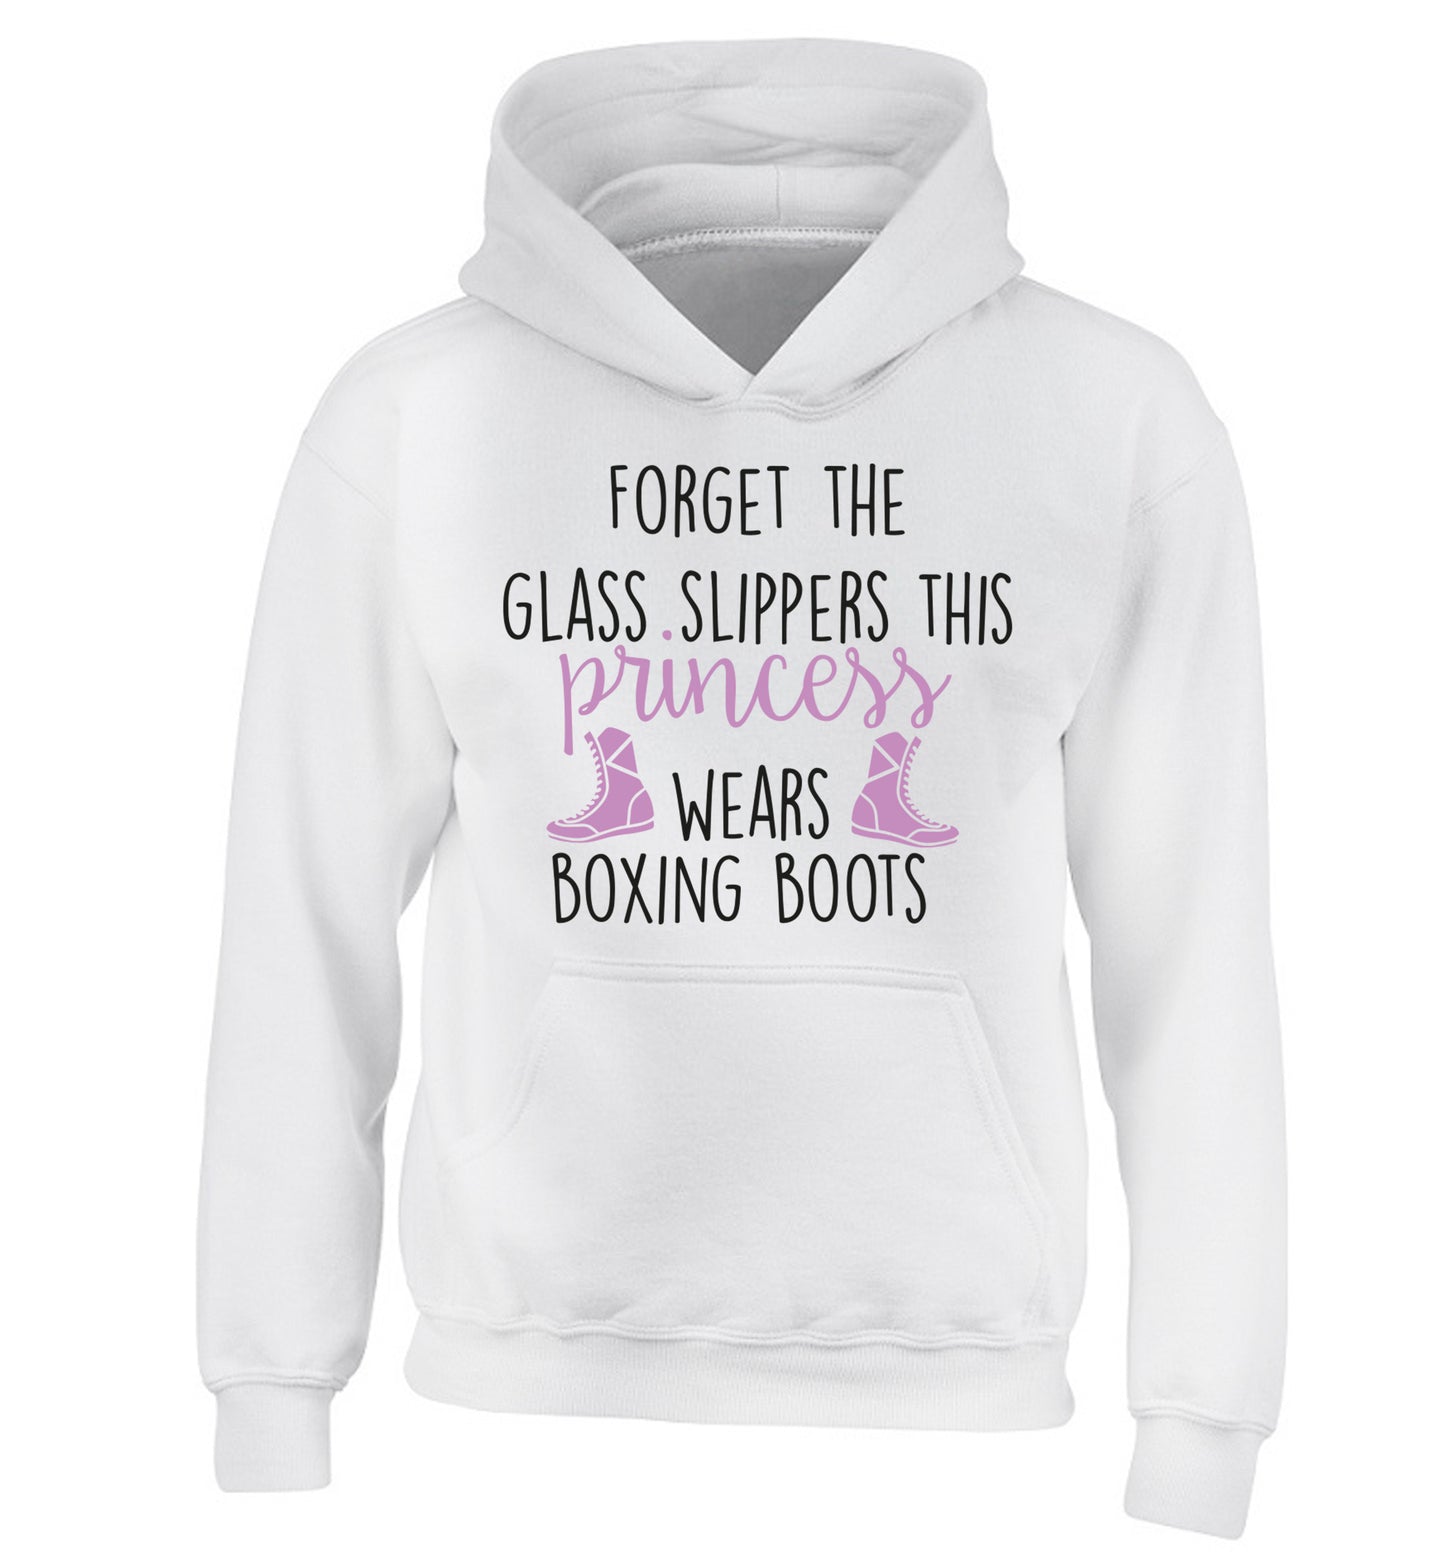 Forget the glass slippers this princess wears boxing boots children's white hoodie 12-14 Years